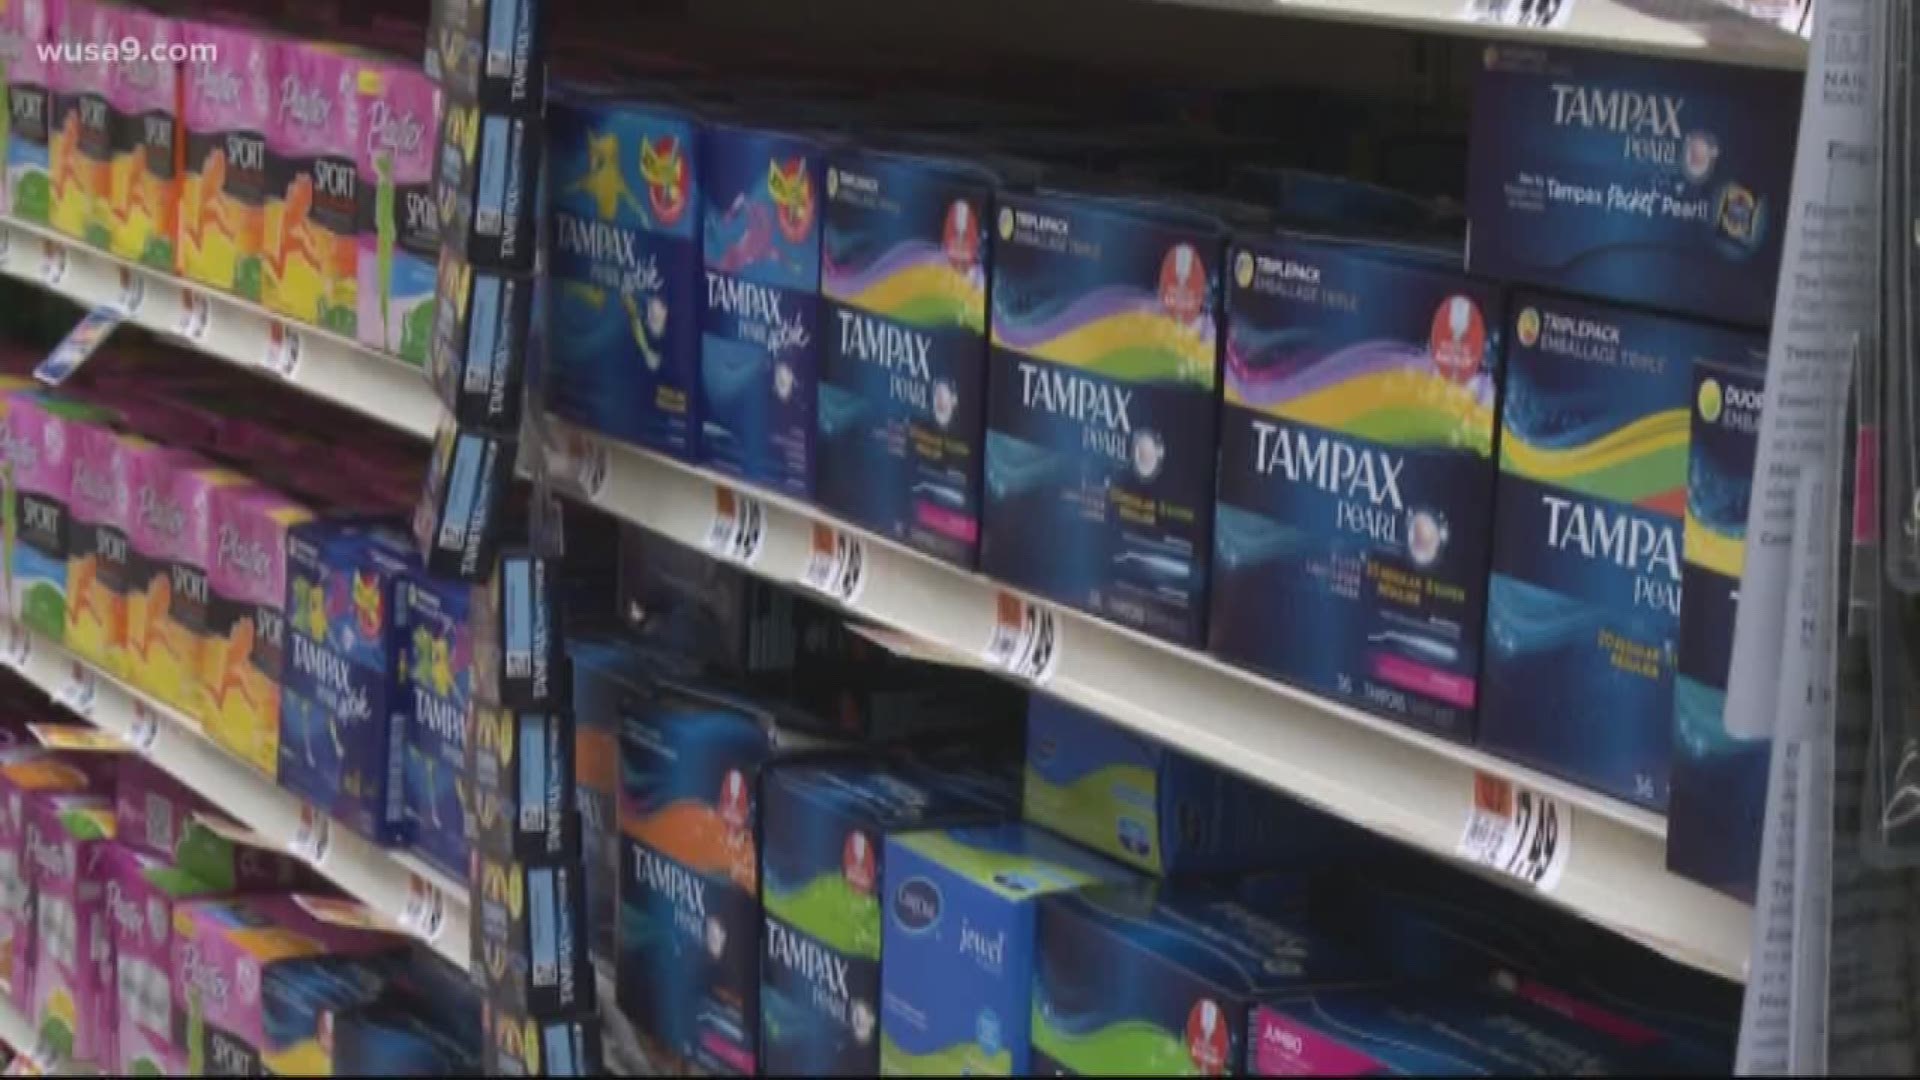 A proposed Maryland bill would ensure public schools provide free menstrual products to students in at least two restrooms by October 2020.